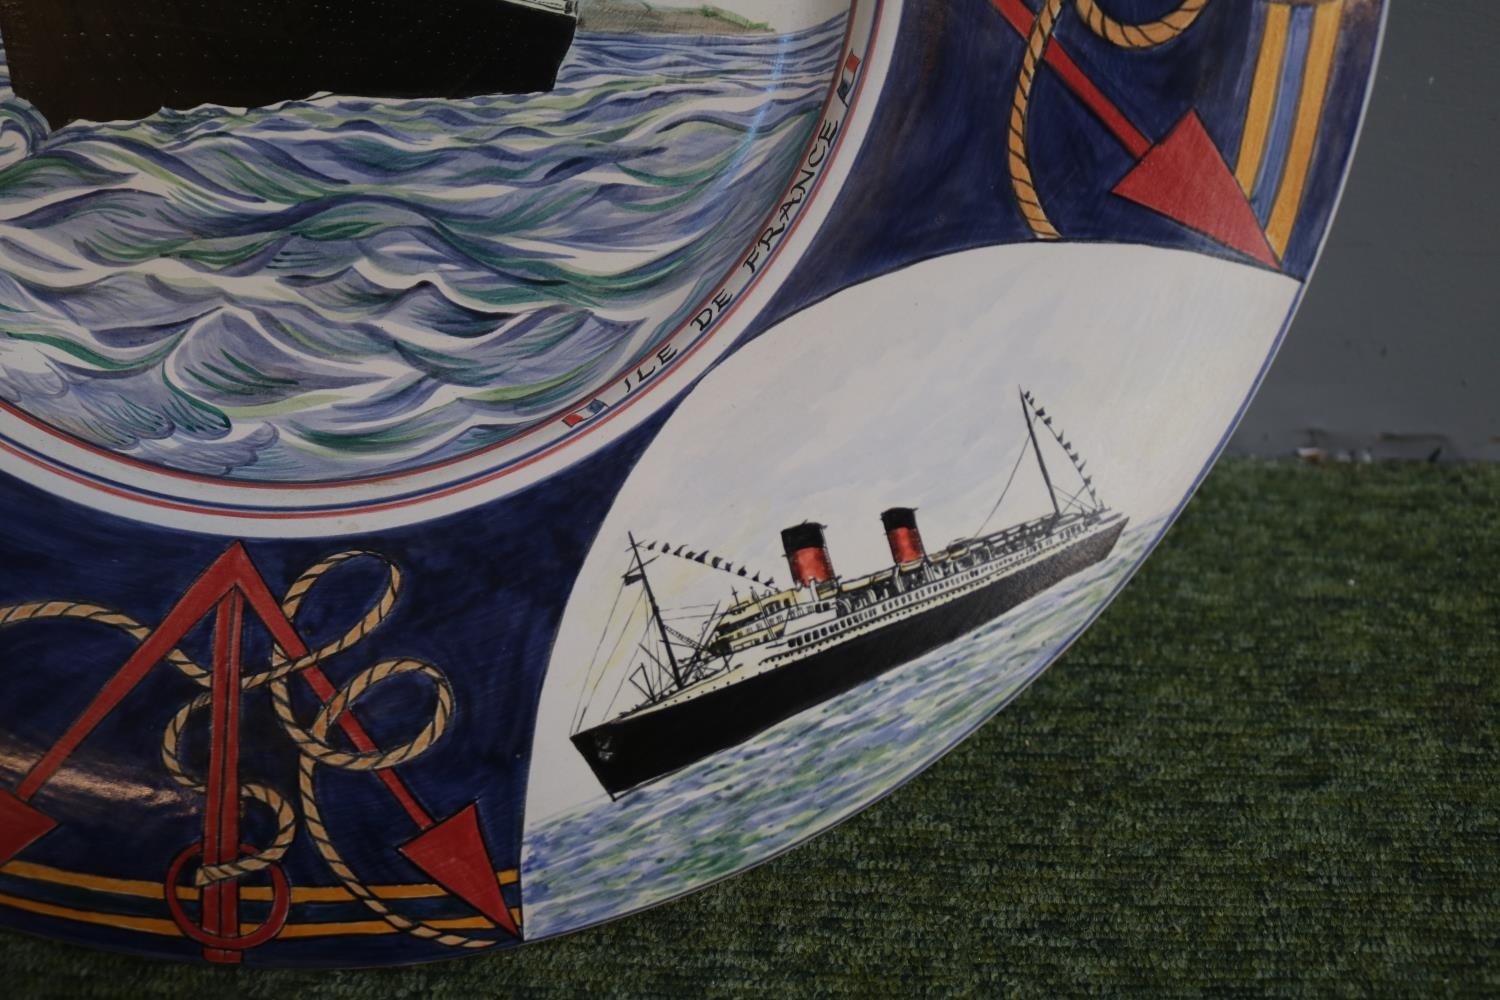 Poole Artist Studio Pottery 'Liner' dish 1 of 1 by Karen Brown dated 2004 to include Titanic, QE II - Image 5 of 7